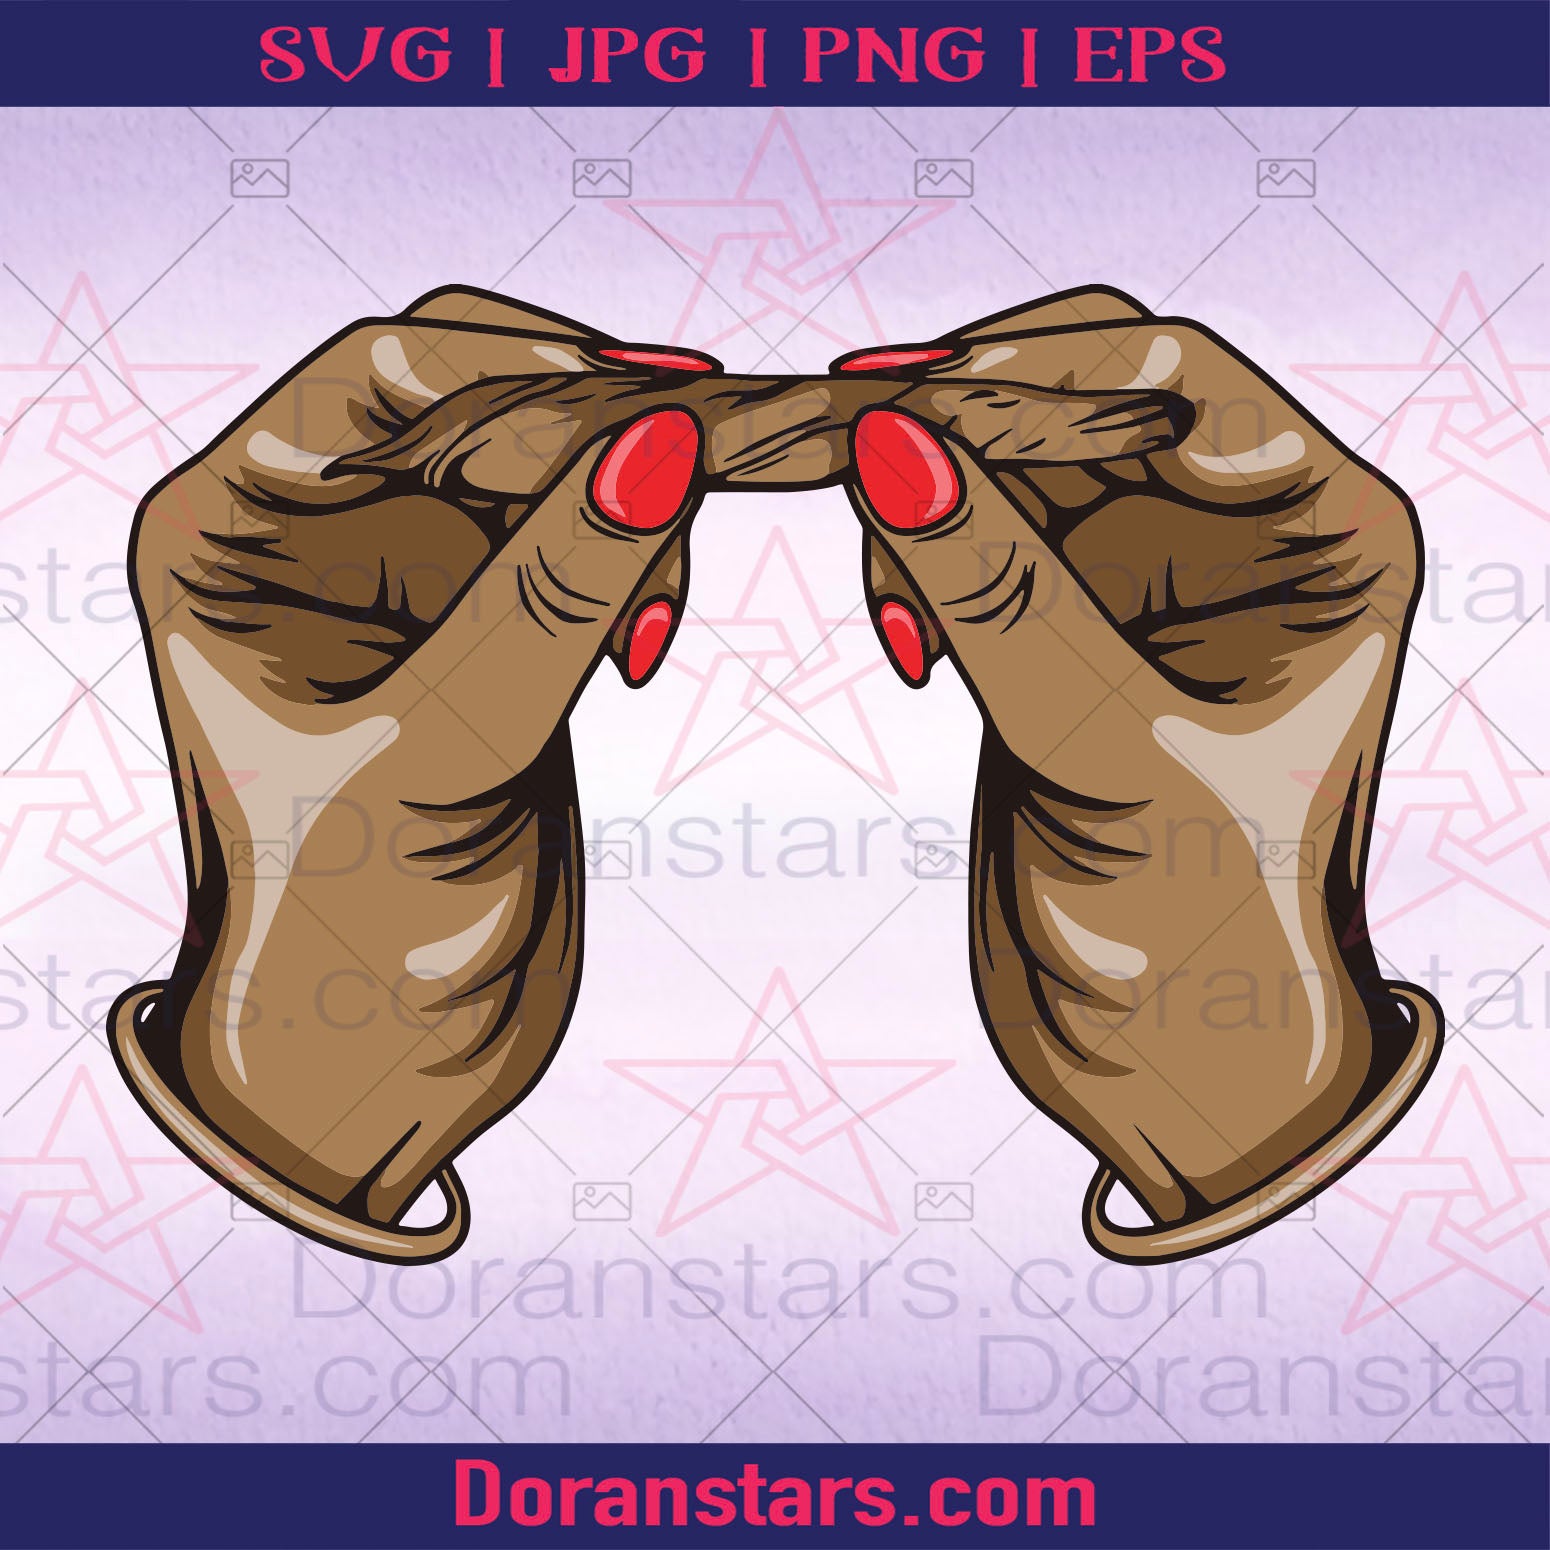 Clipart of a Nail Clipper Mascot by a Hand and Foot - Royalty Free Vector  Illustration by BNP Design Studio #1519416